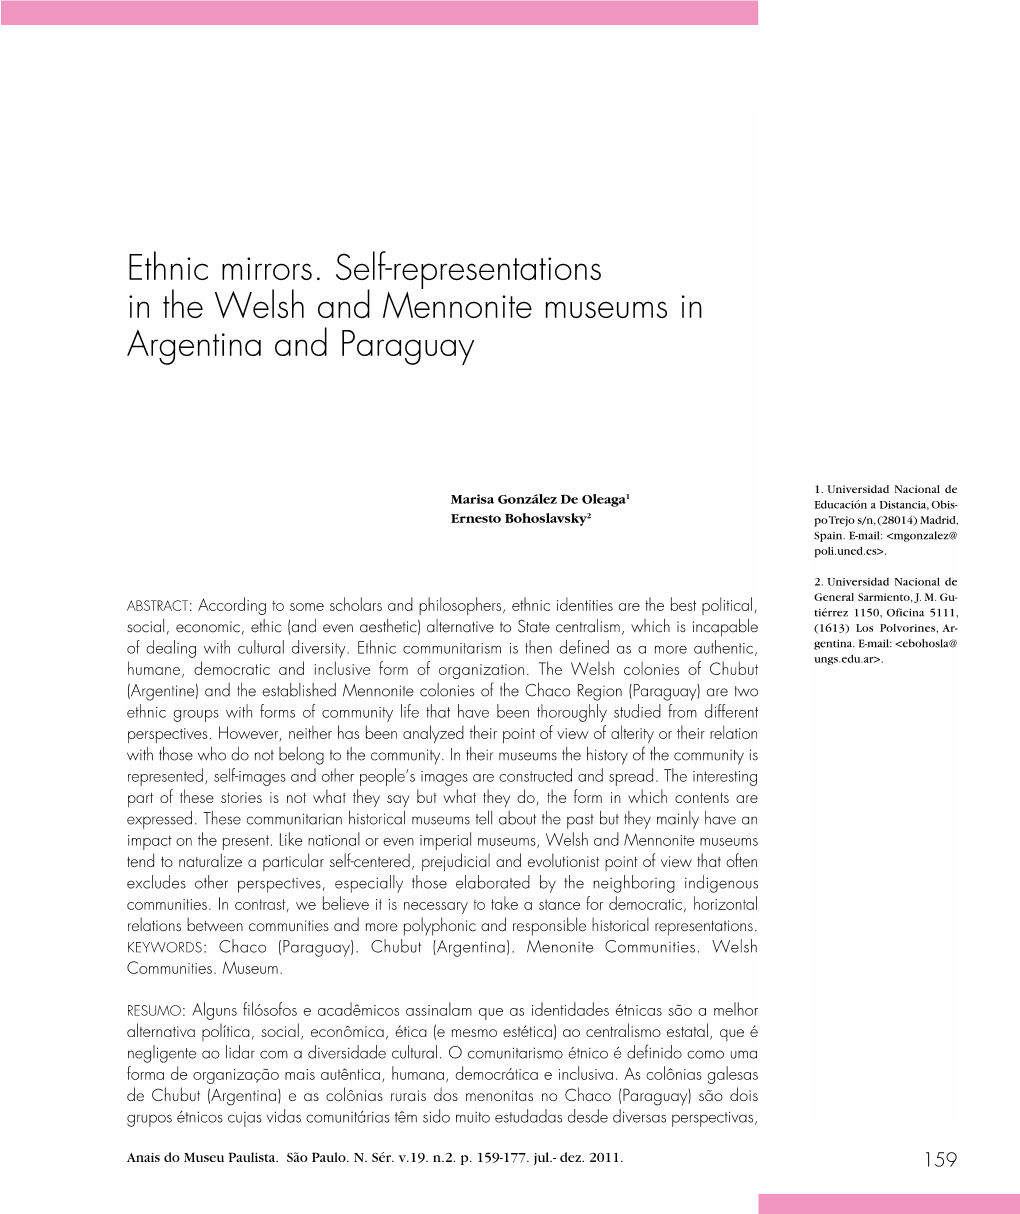 Ethnic Mirrors. Self-Representations in the Welsh and Mennonite Museums in Argentina and Paraguay